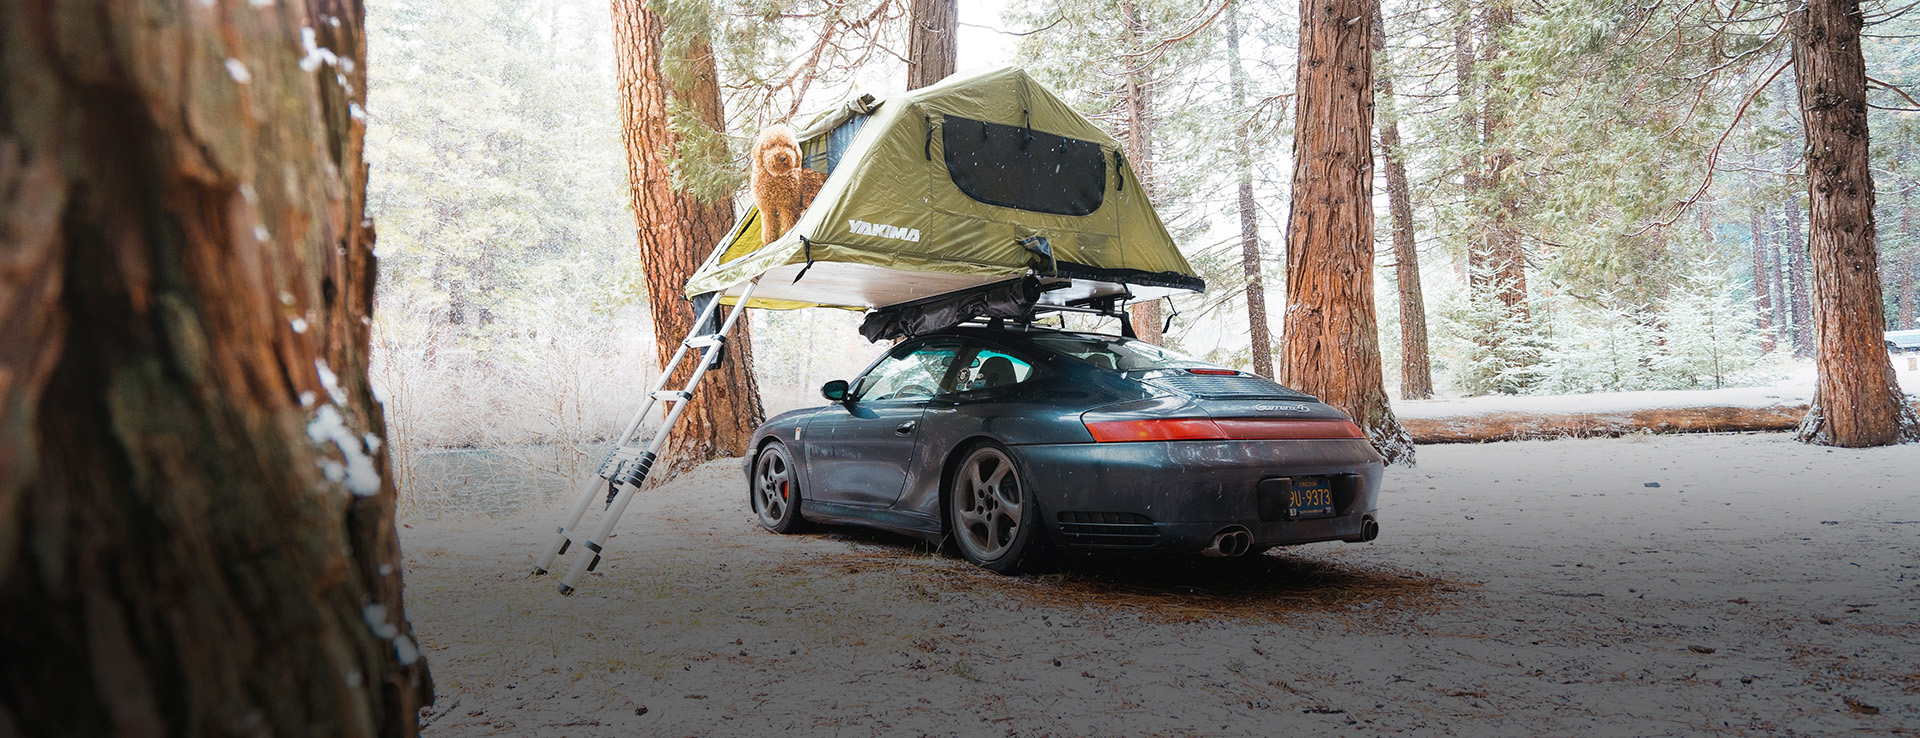 Porsche parked in woods with tent on roof, dog inside